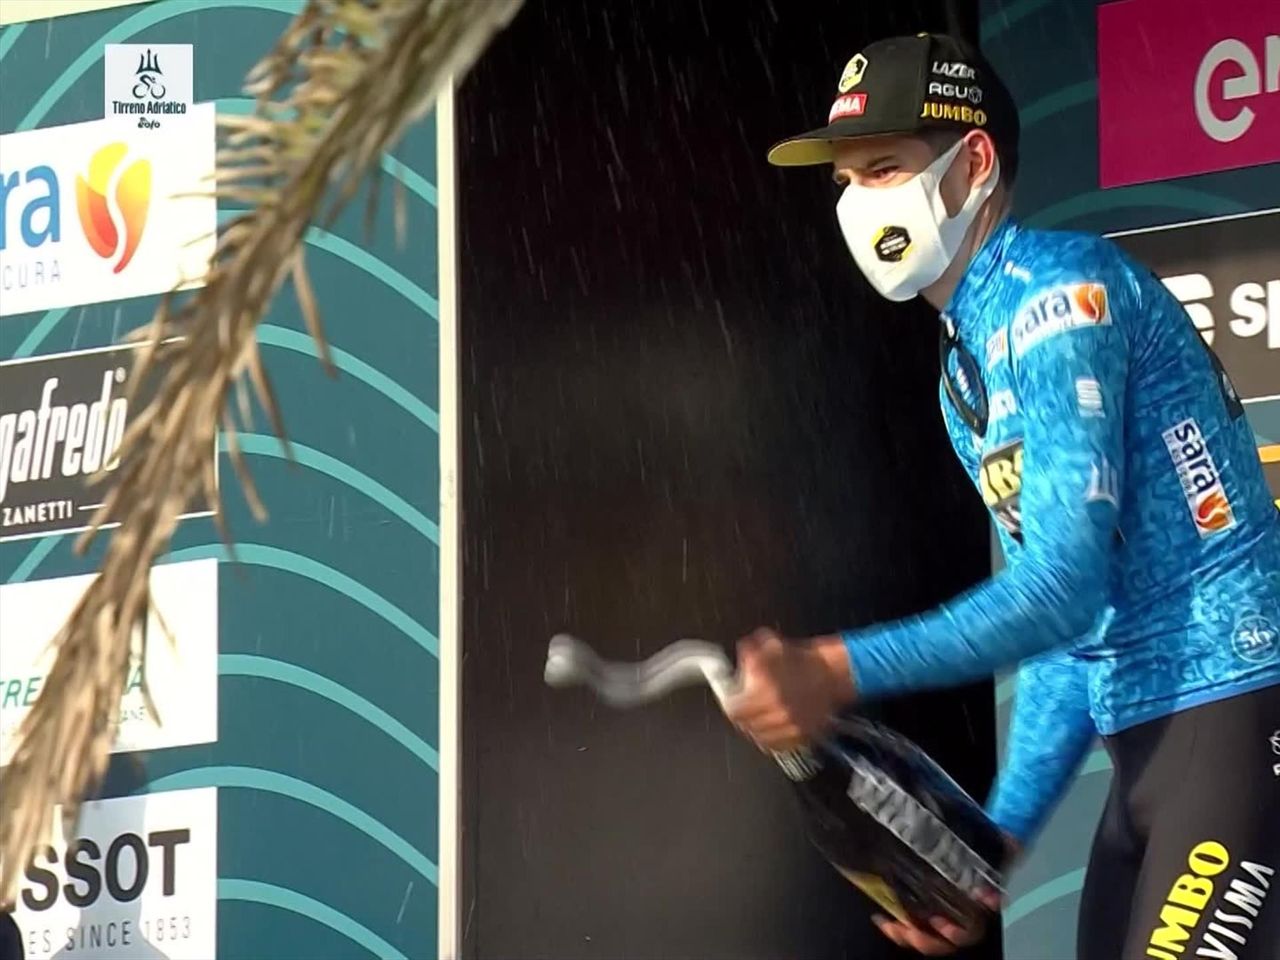 Tirreno-Adriatico 2021 cycling news - Highlights Stage 1 - Wout van Aert takes opening stage - Cycling video